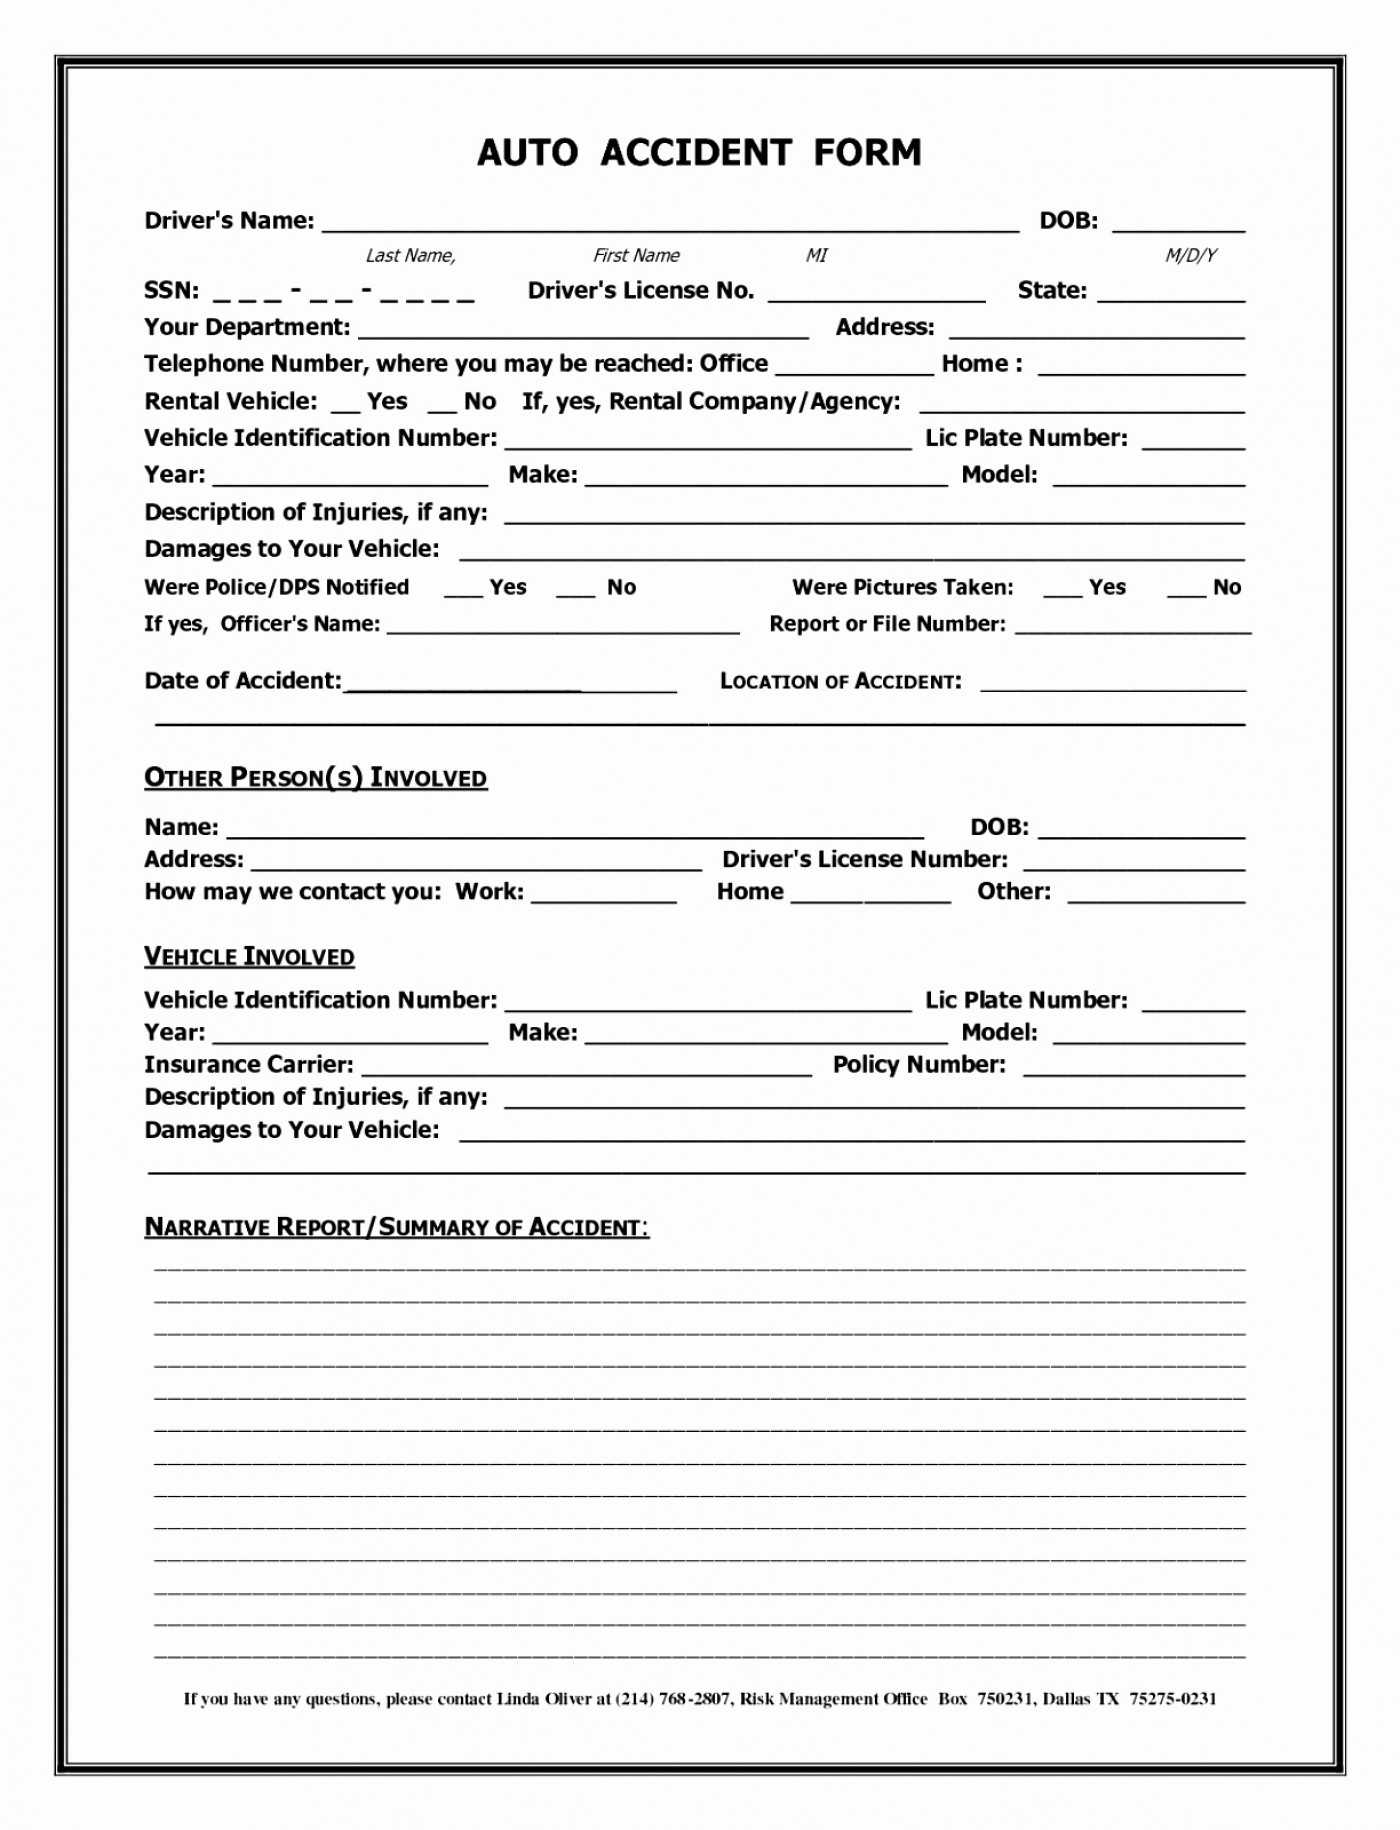 019 Accident Report Forms Template Form Unique Hand Book Pertaining To Book Report Template In Spanish